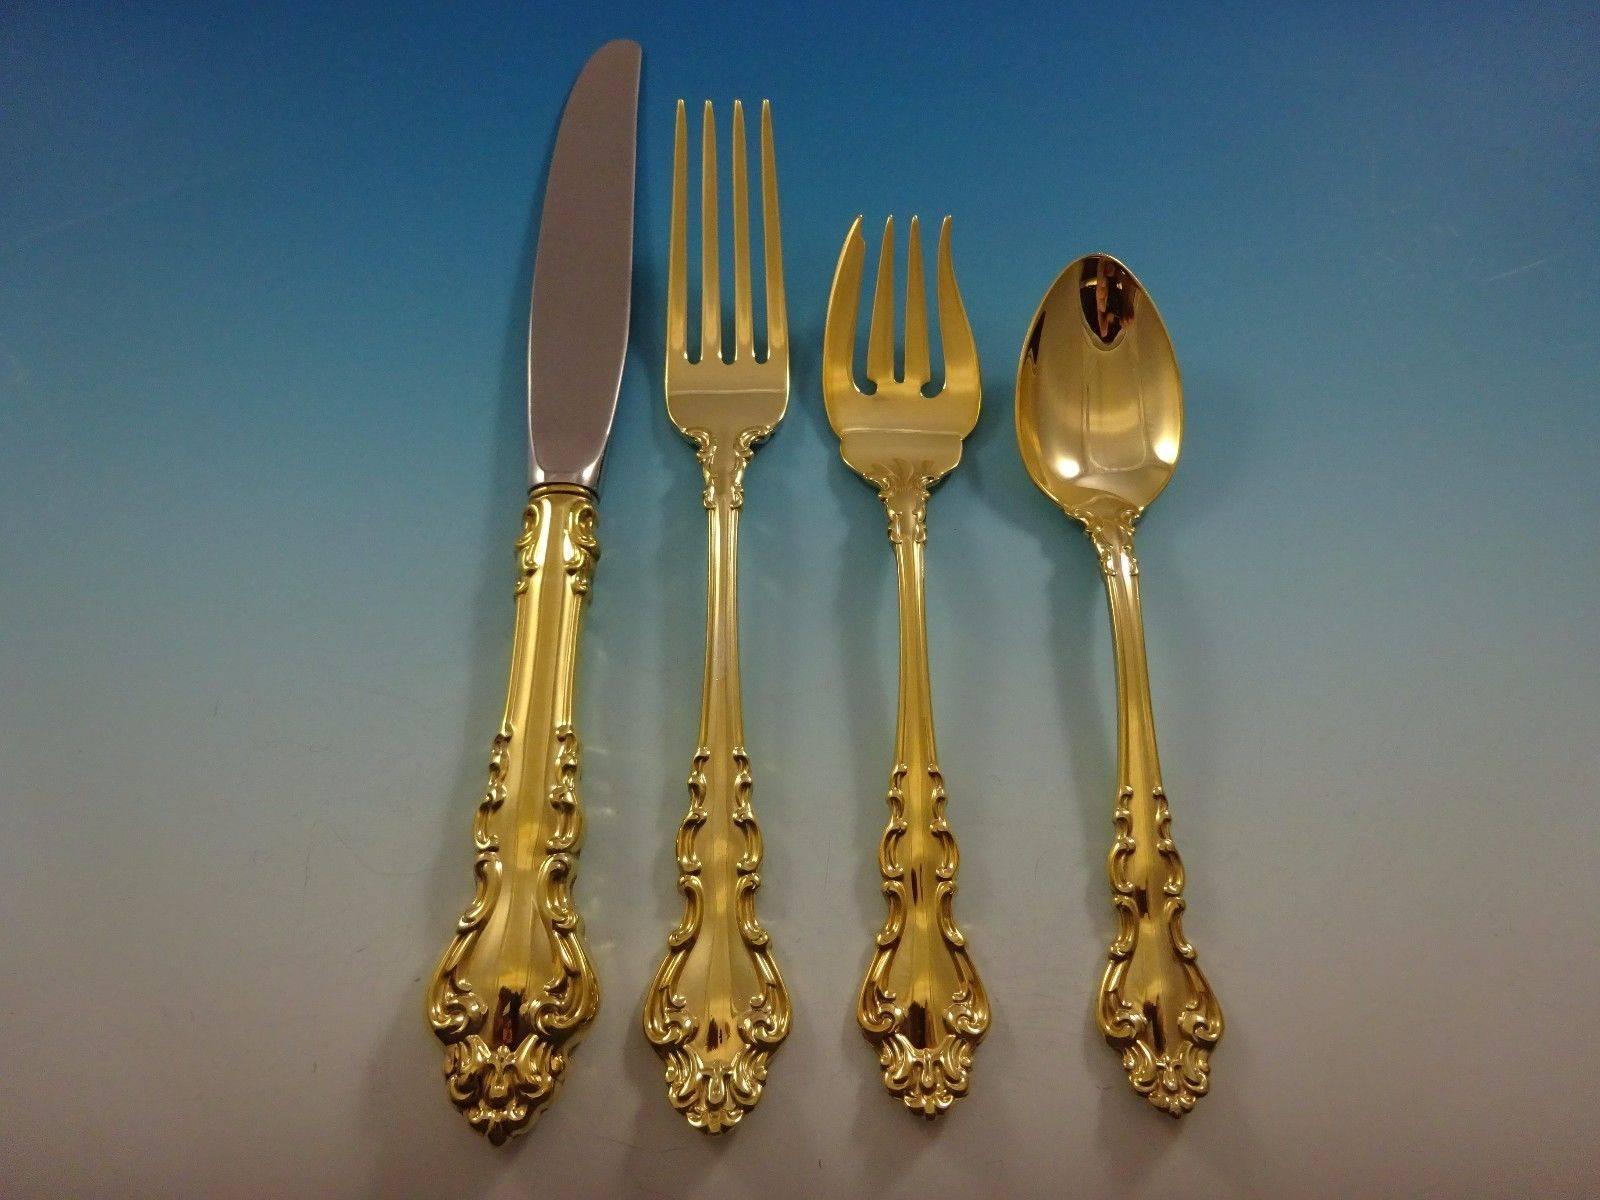 Spanish Baroque gold by Reed & Barton sterling silver flatware set - 32 pieces. This set is vermeil (completely gold-washed) and includes: 

Eight knives, 9 1/8